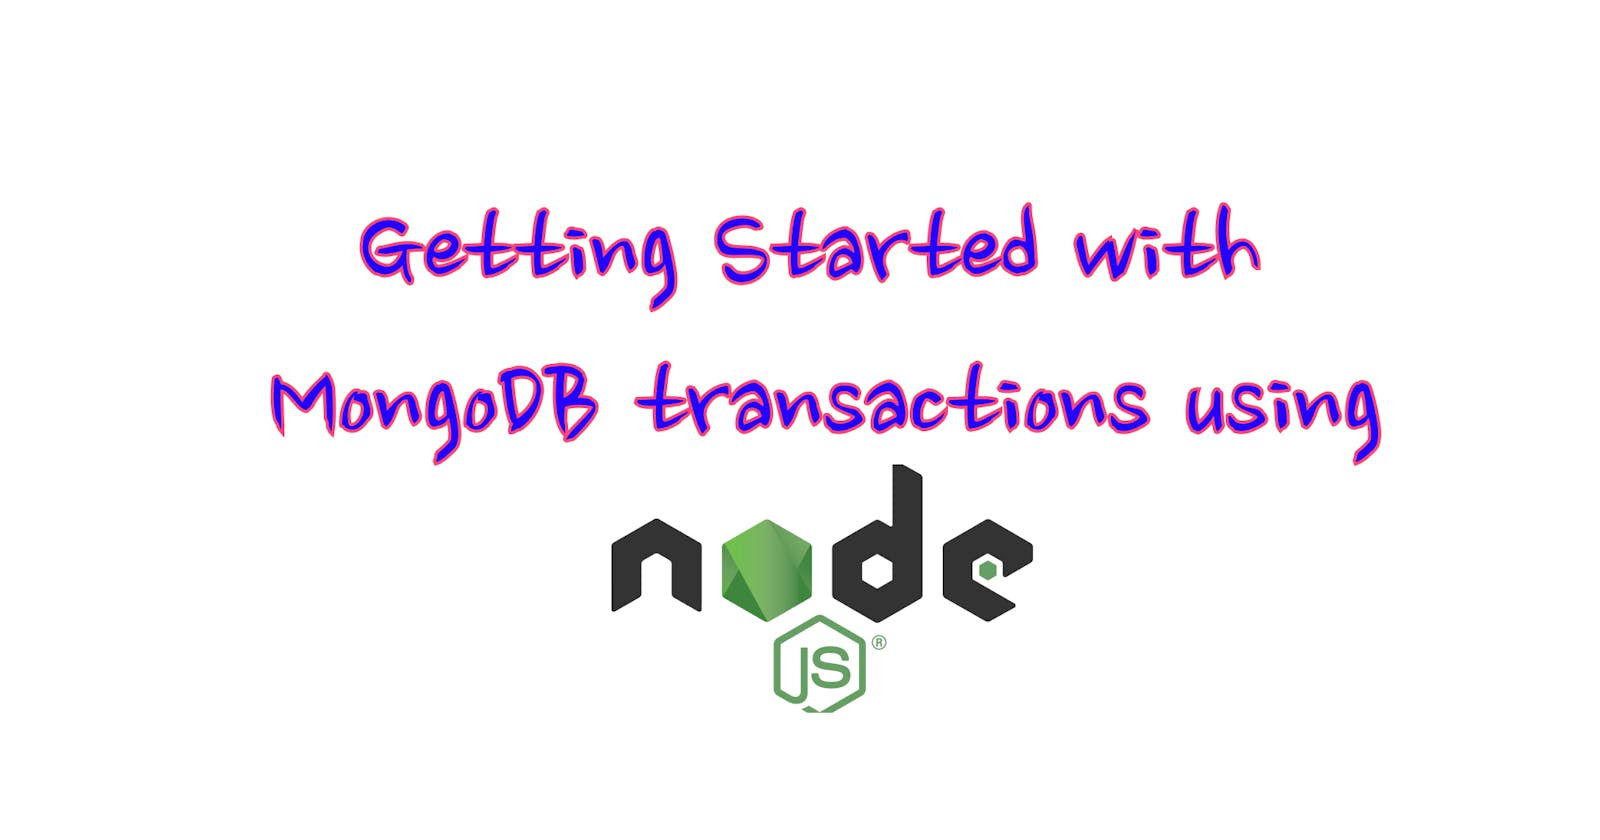 Getting started with MongoDB transactions using Node.js